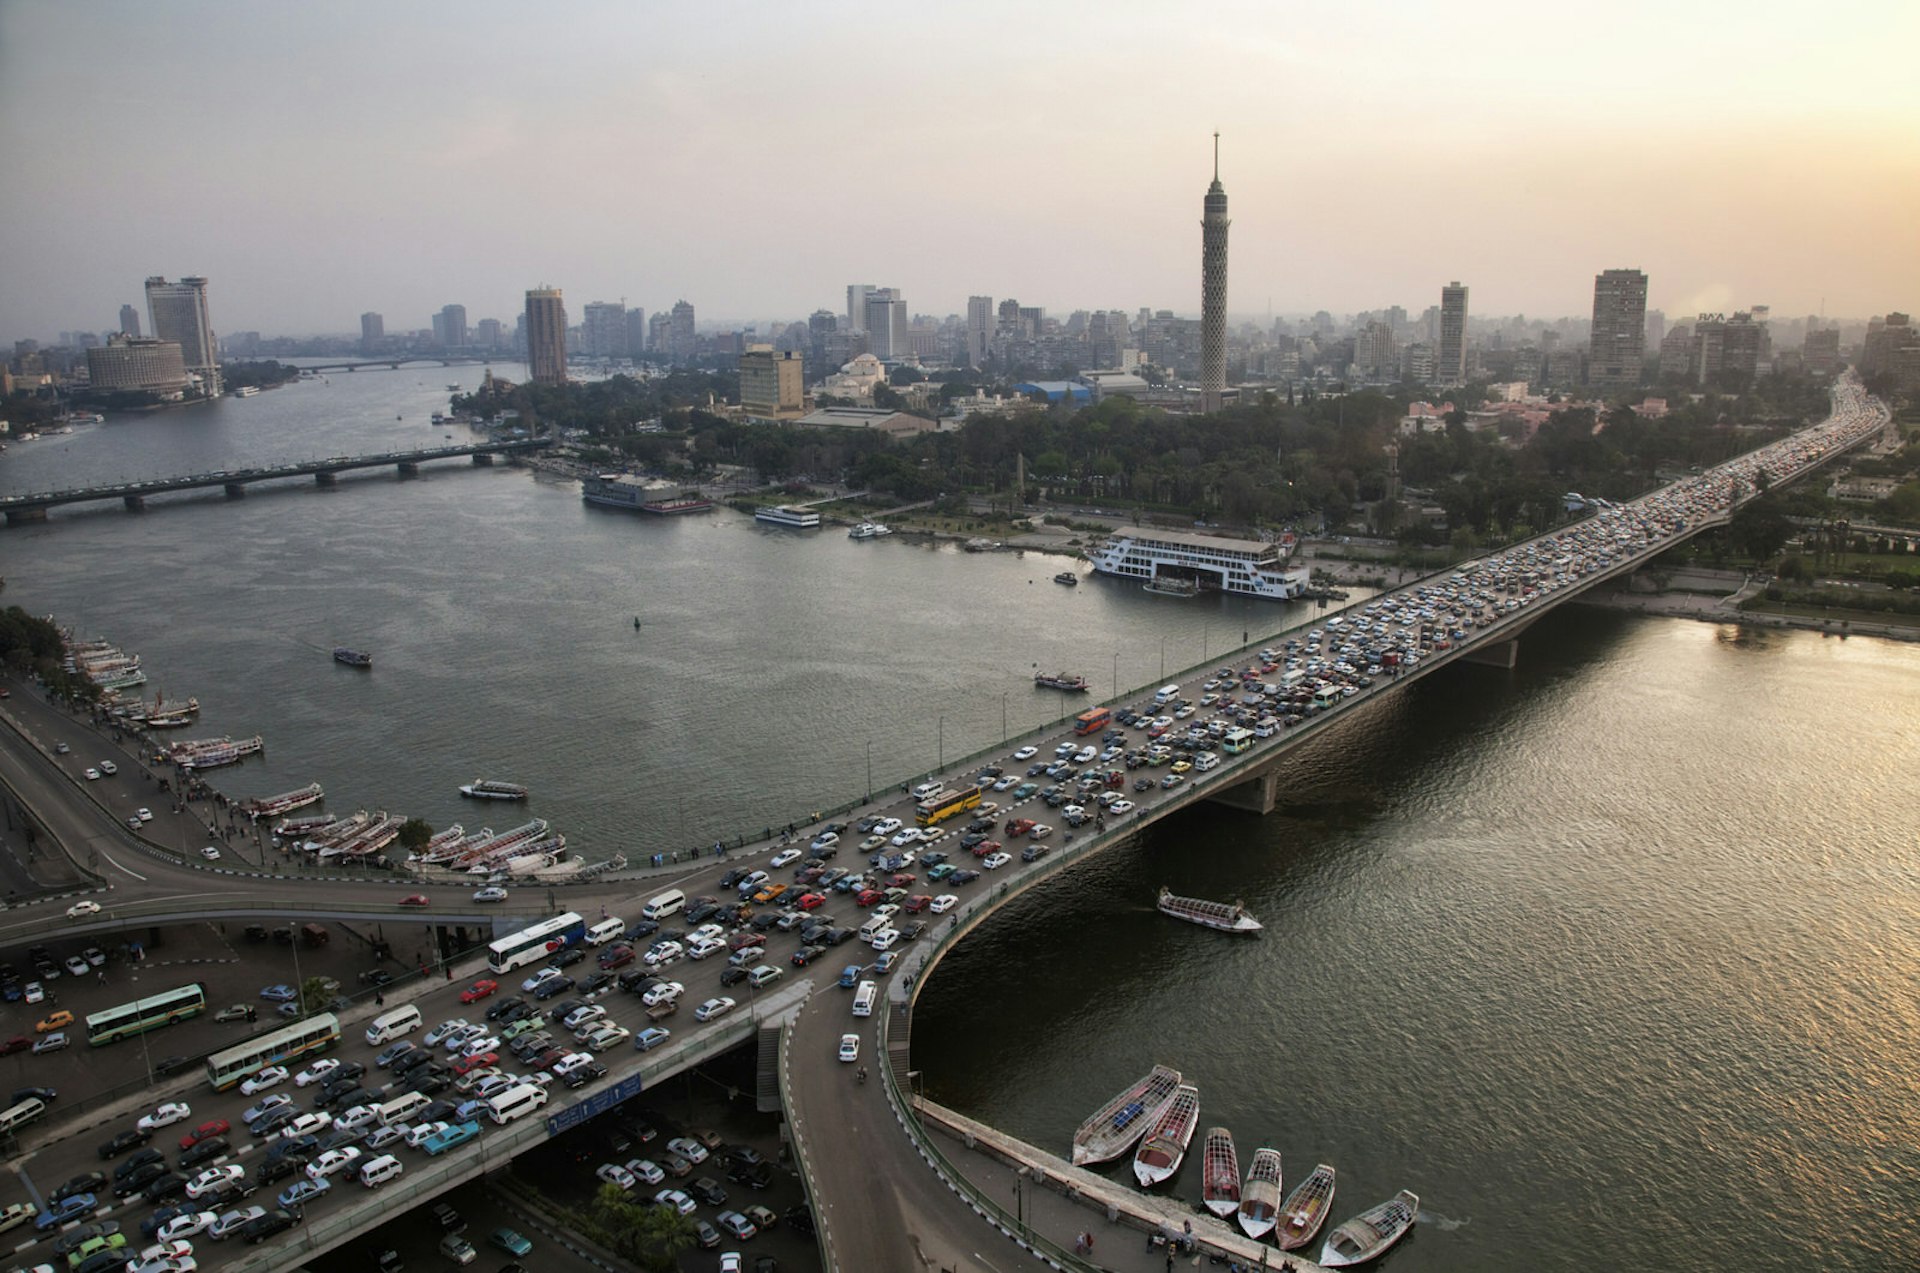 6th of October Bridge over the Nile, with traffic, at dusk, Cairo, Egypt